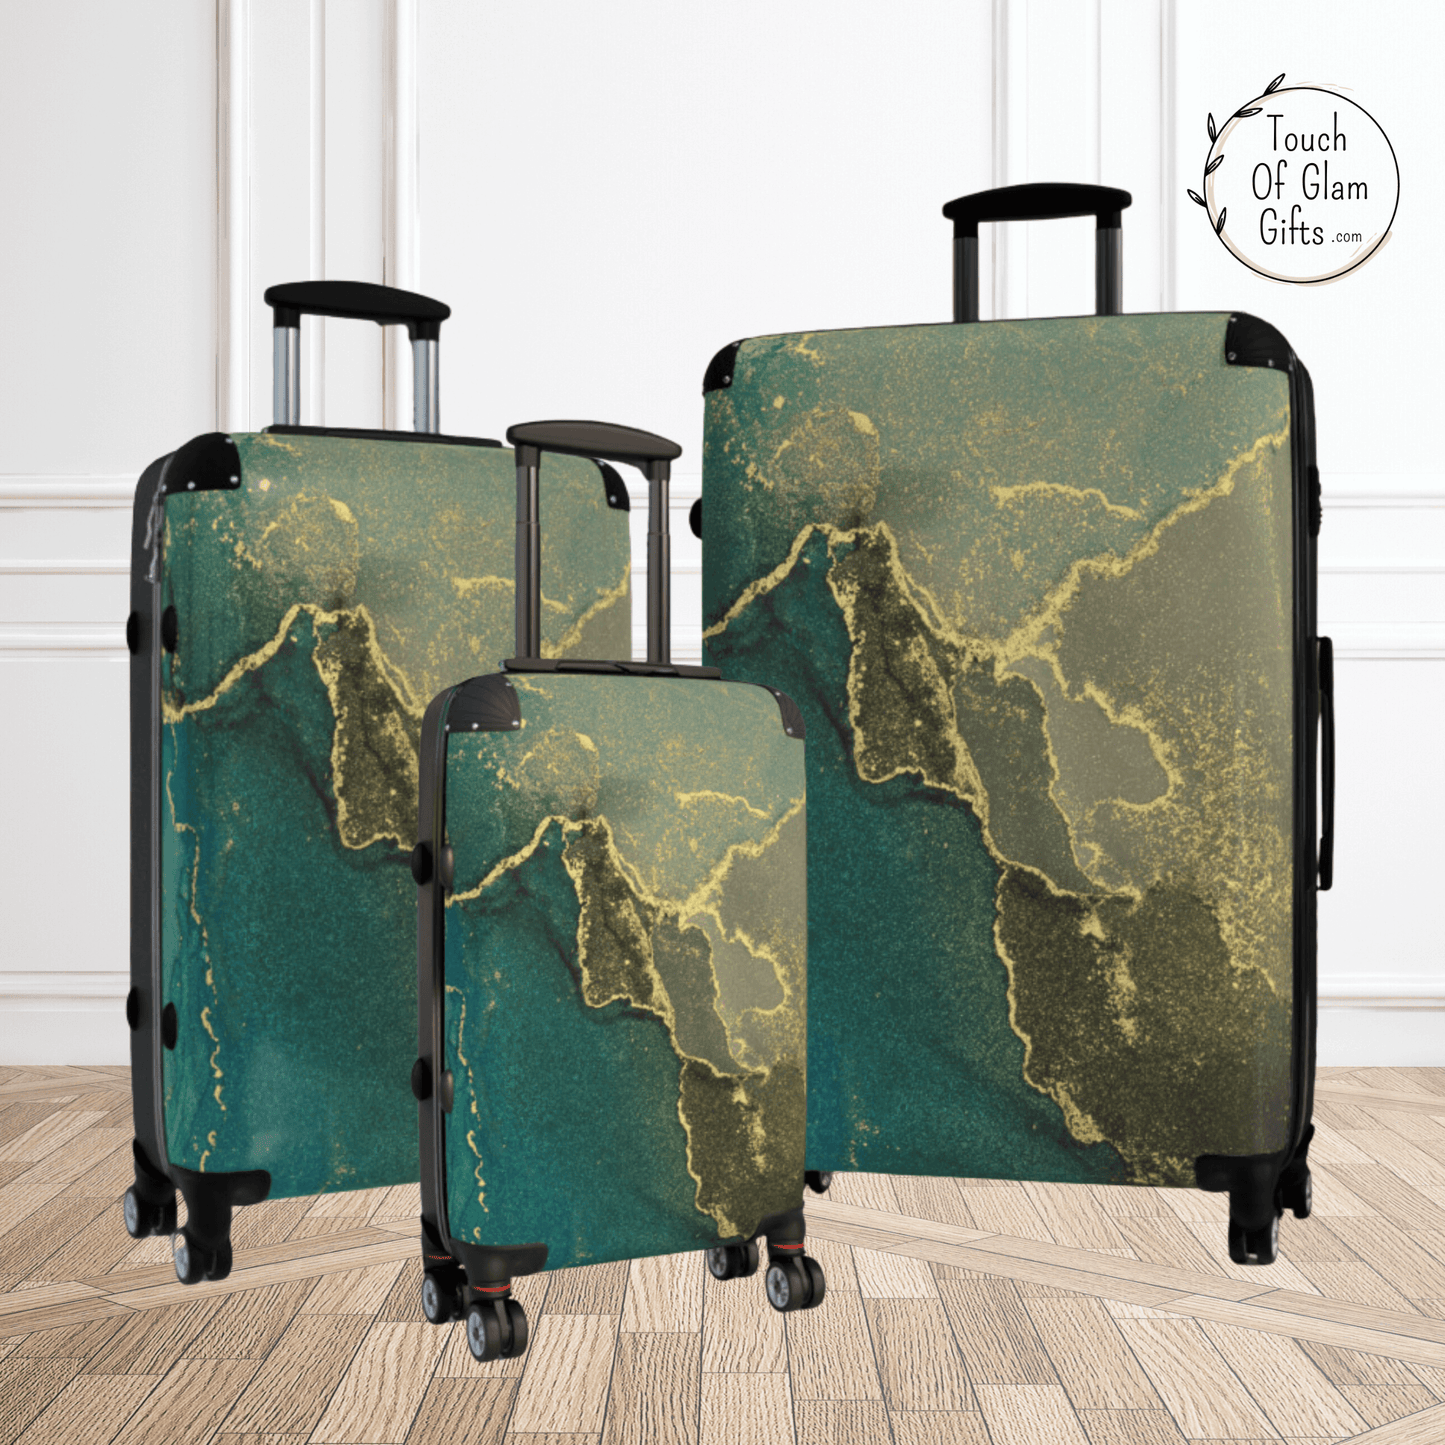 three sizes of suitcases with a designer marble look for this designer luggage set.